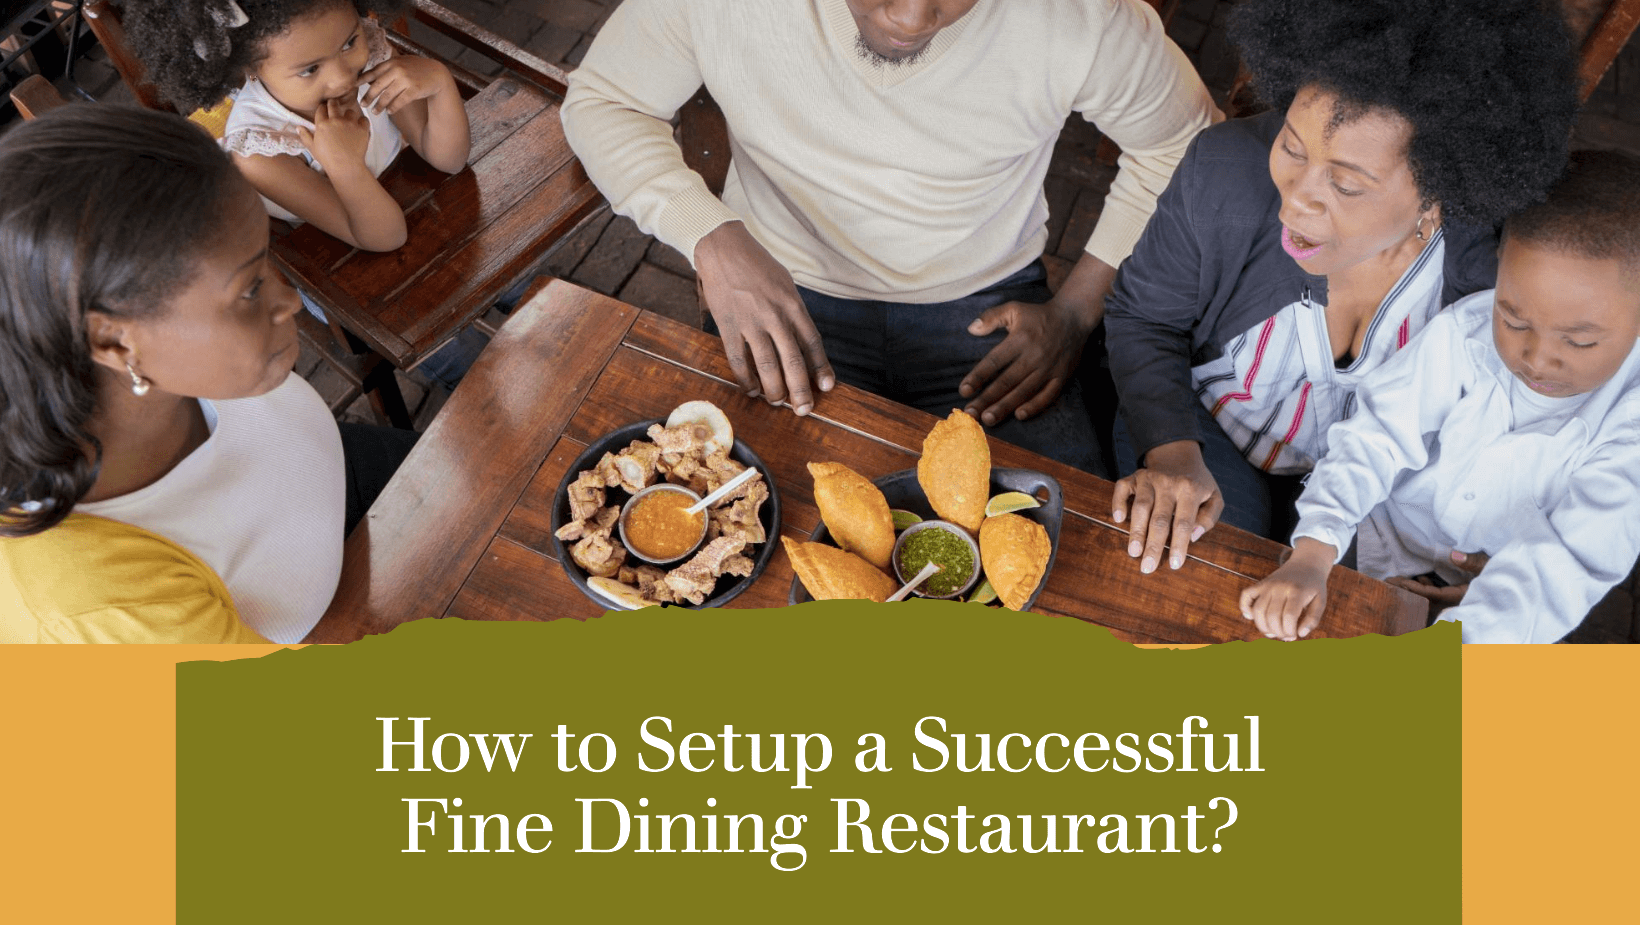 How to Setup a Successful Fine Dining Restaurant?